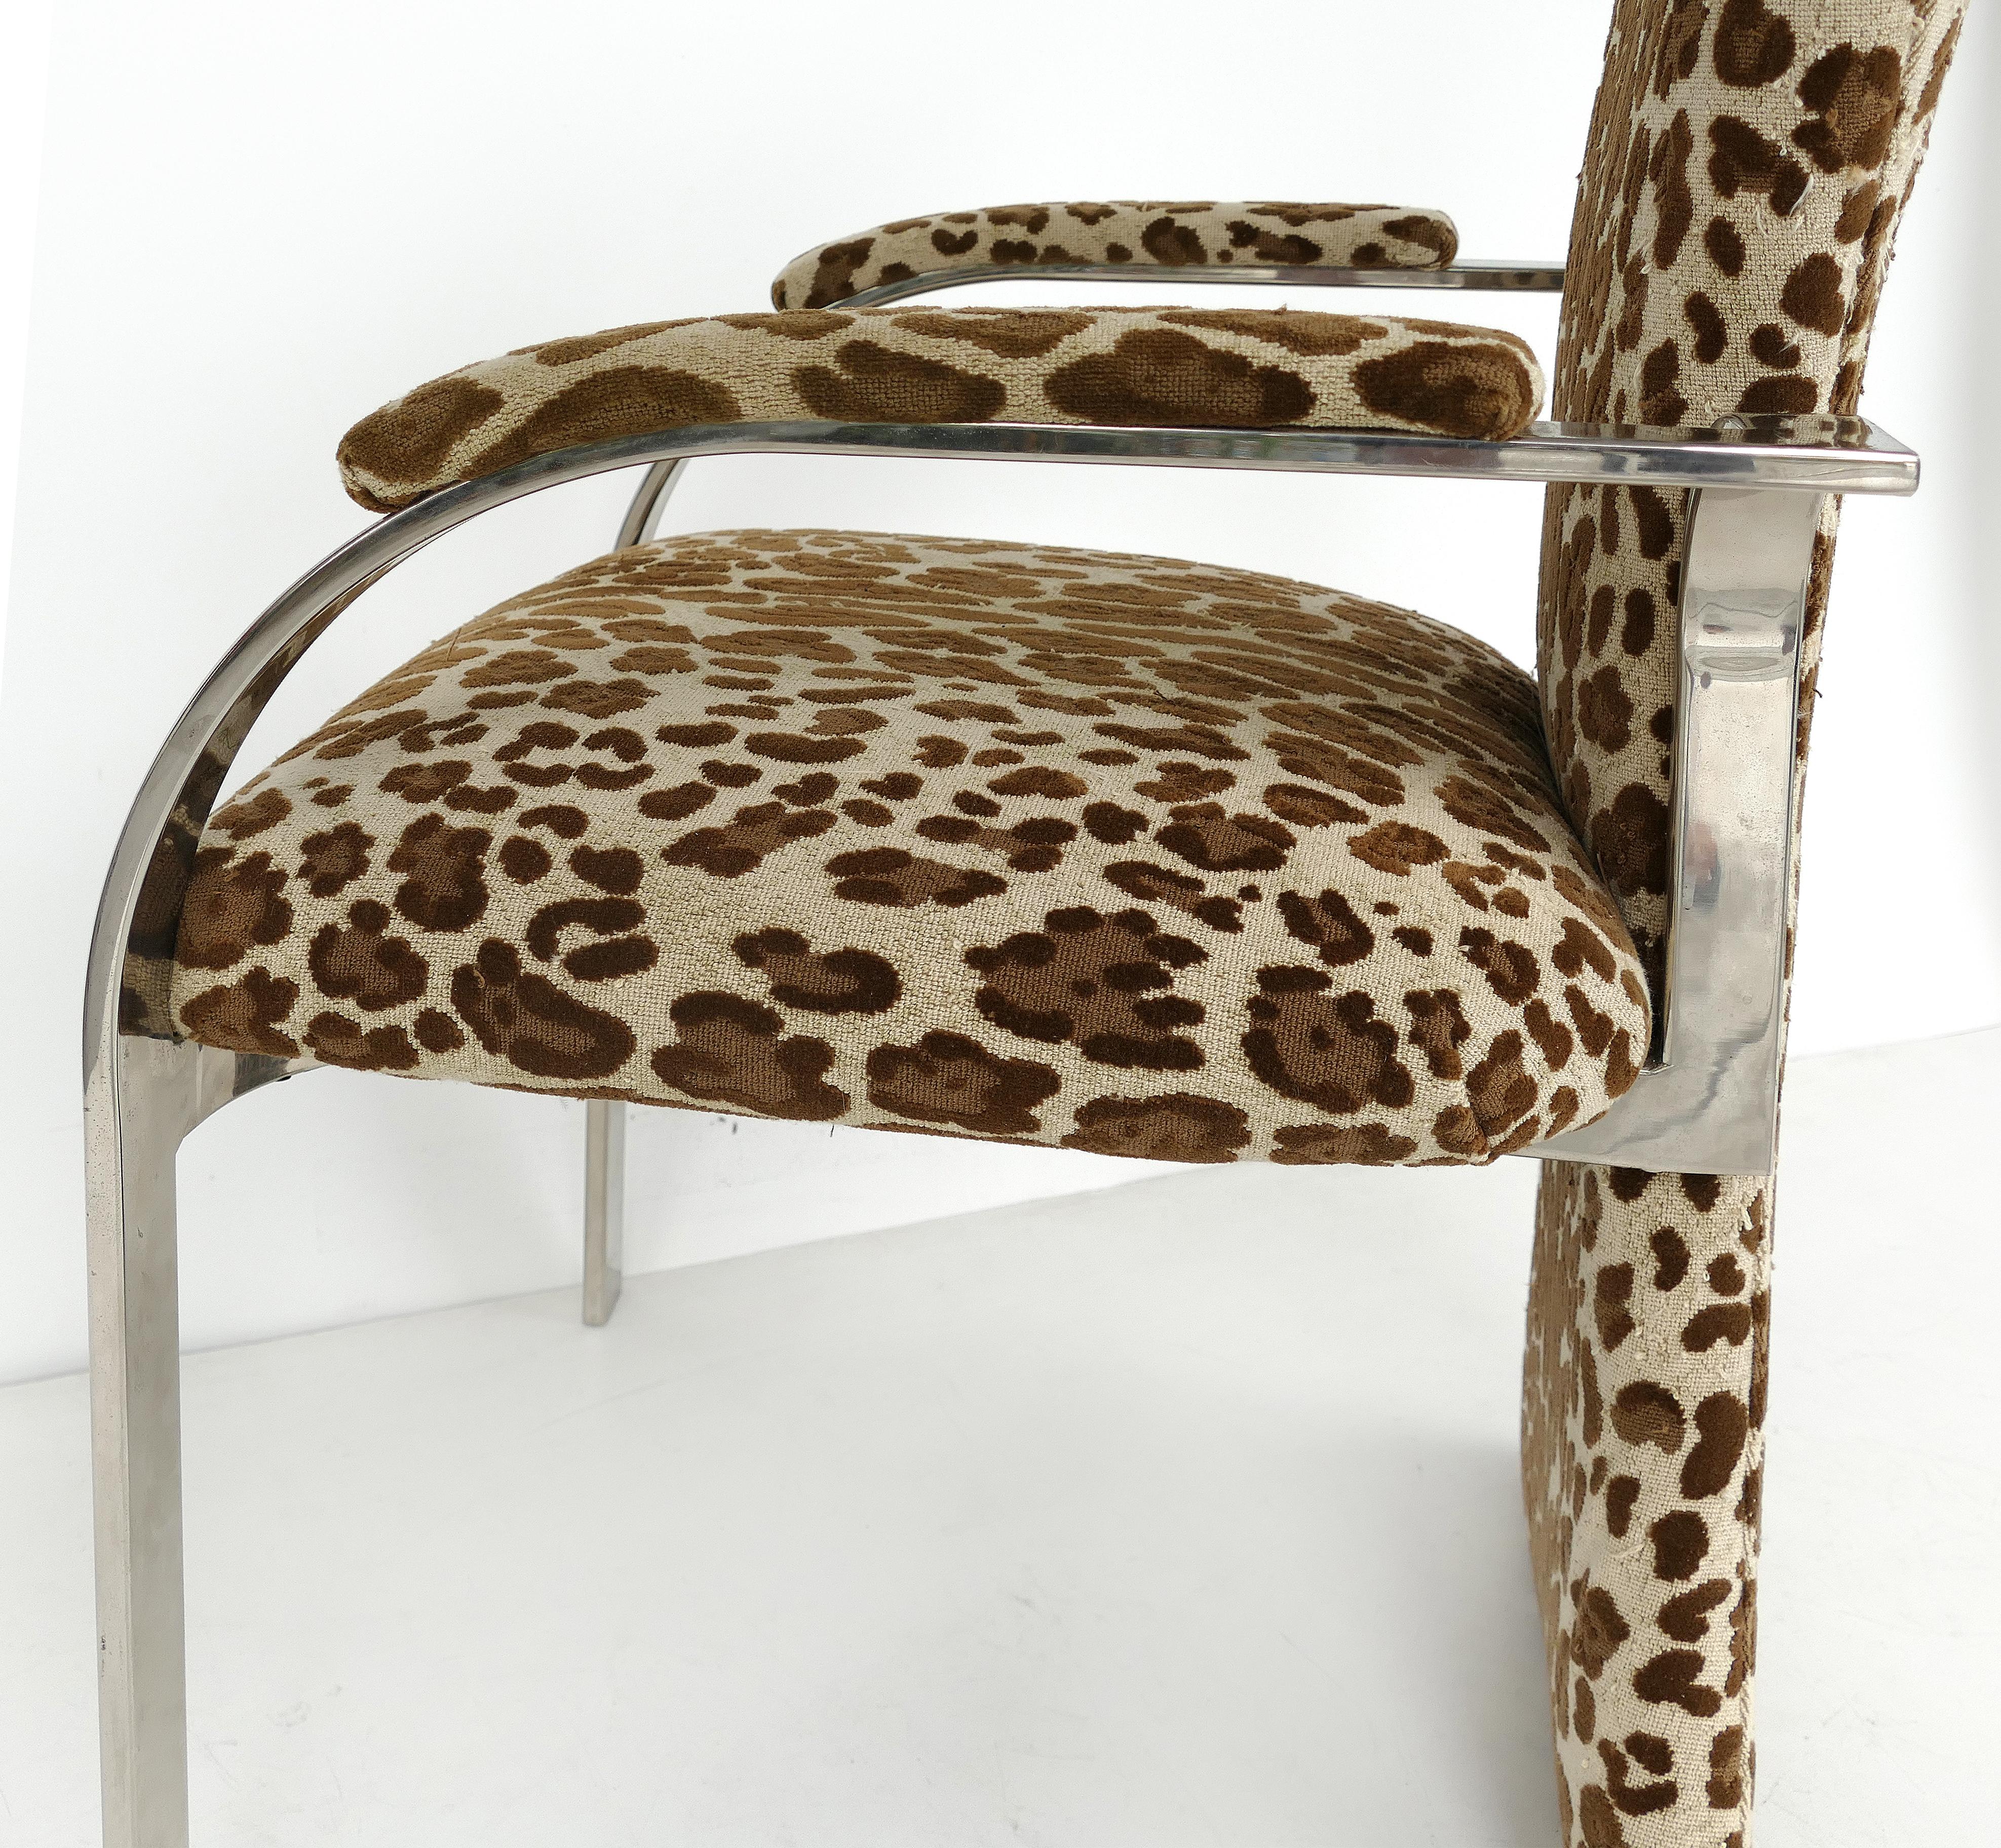 North American Stainless Steel Armchairs with Leopard Animal Print Upholstery